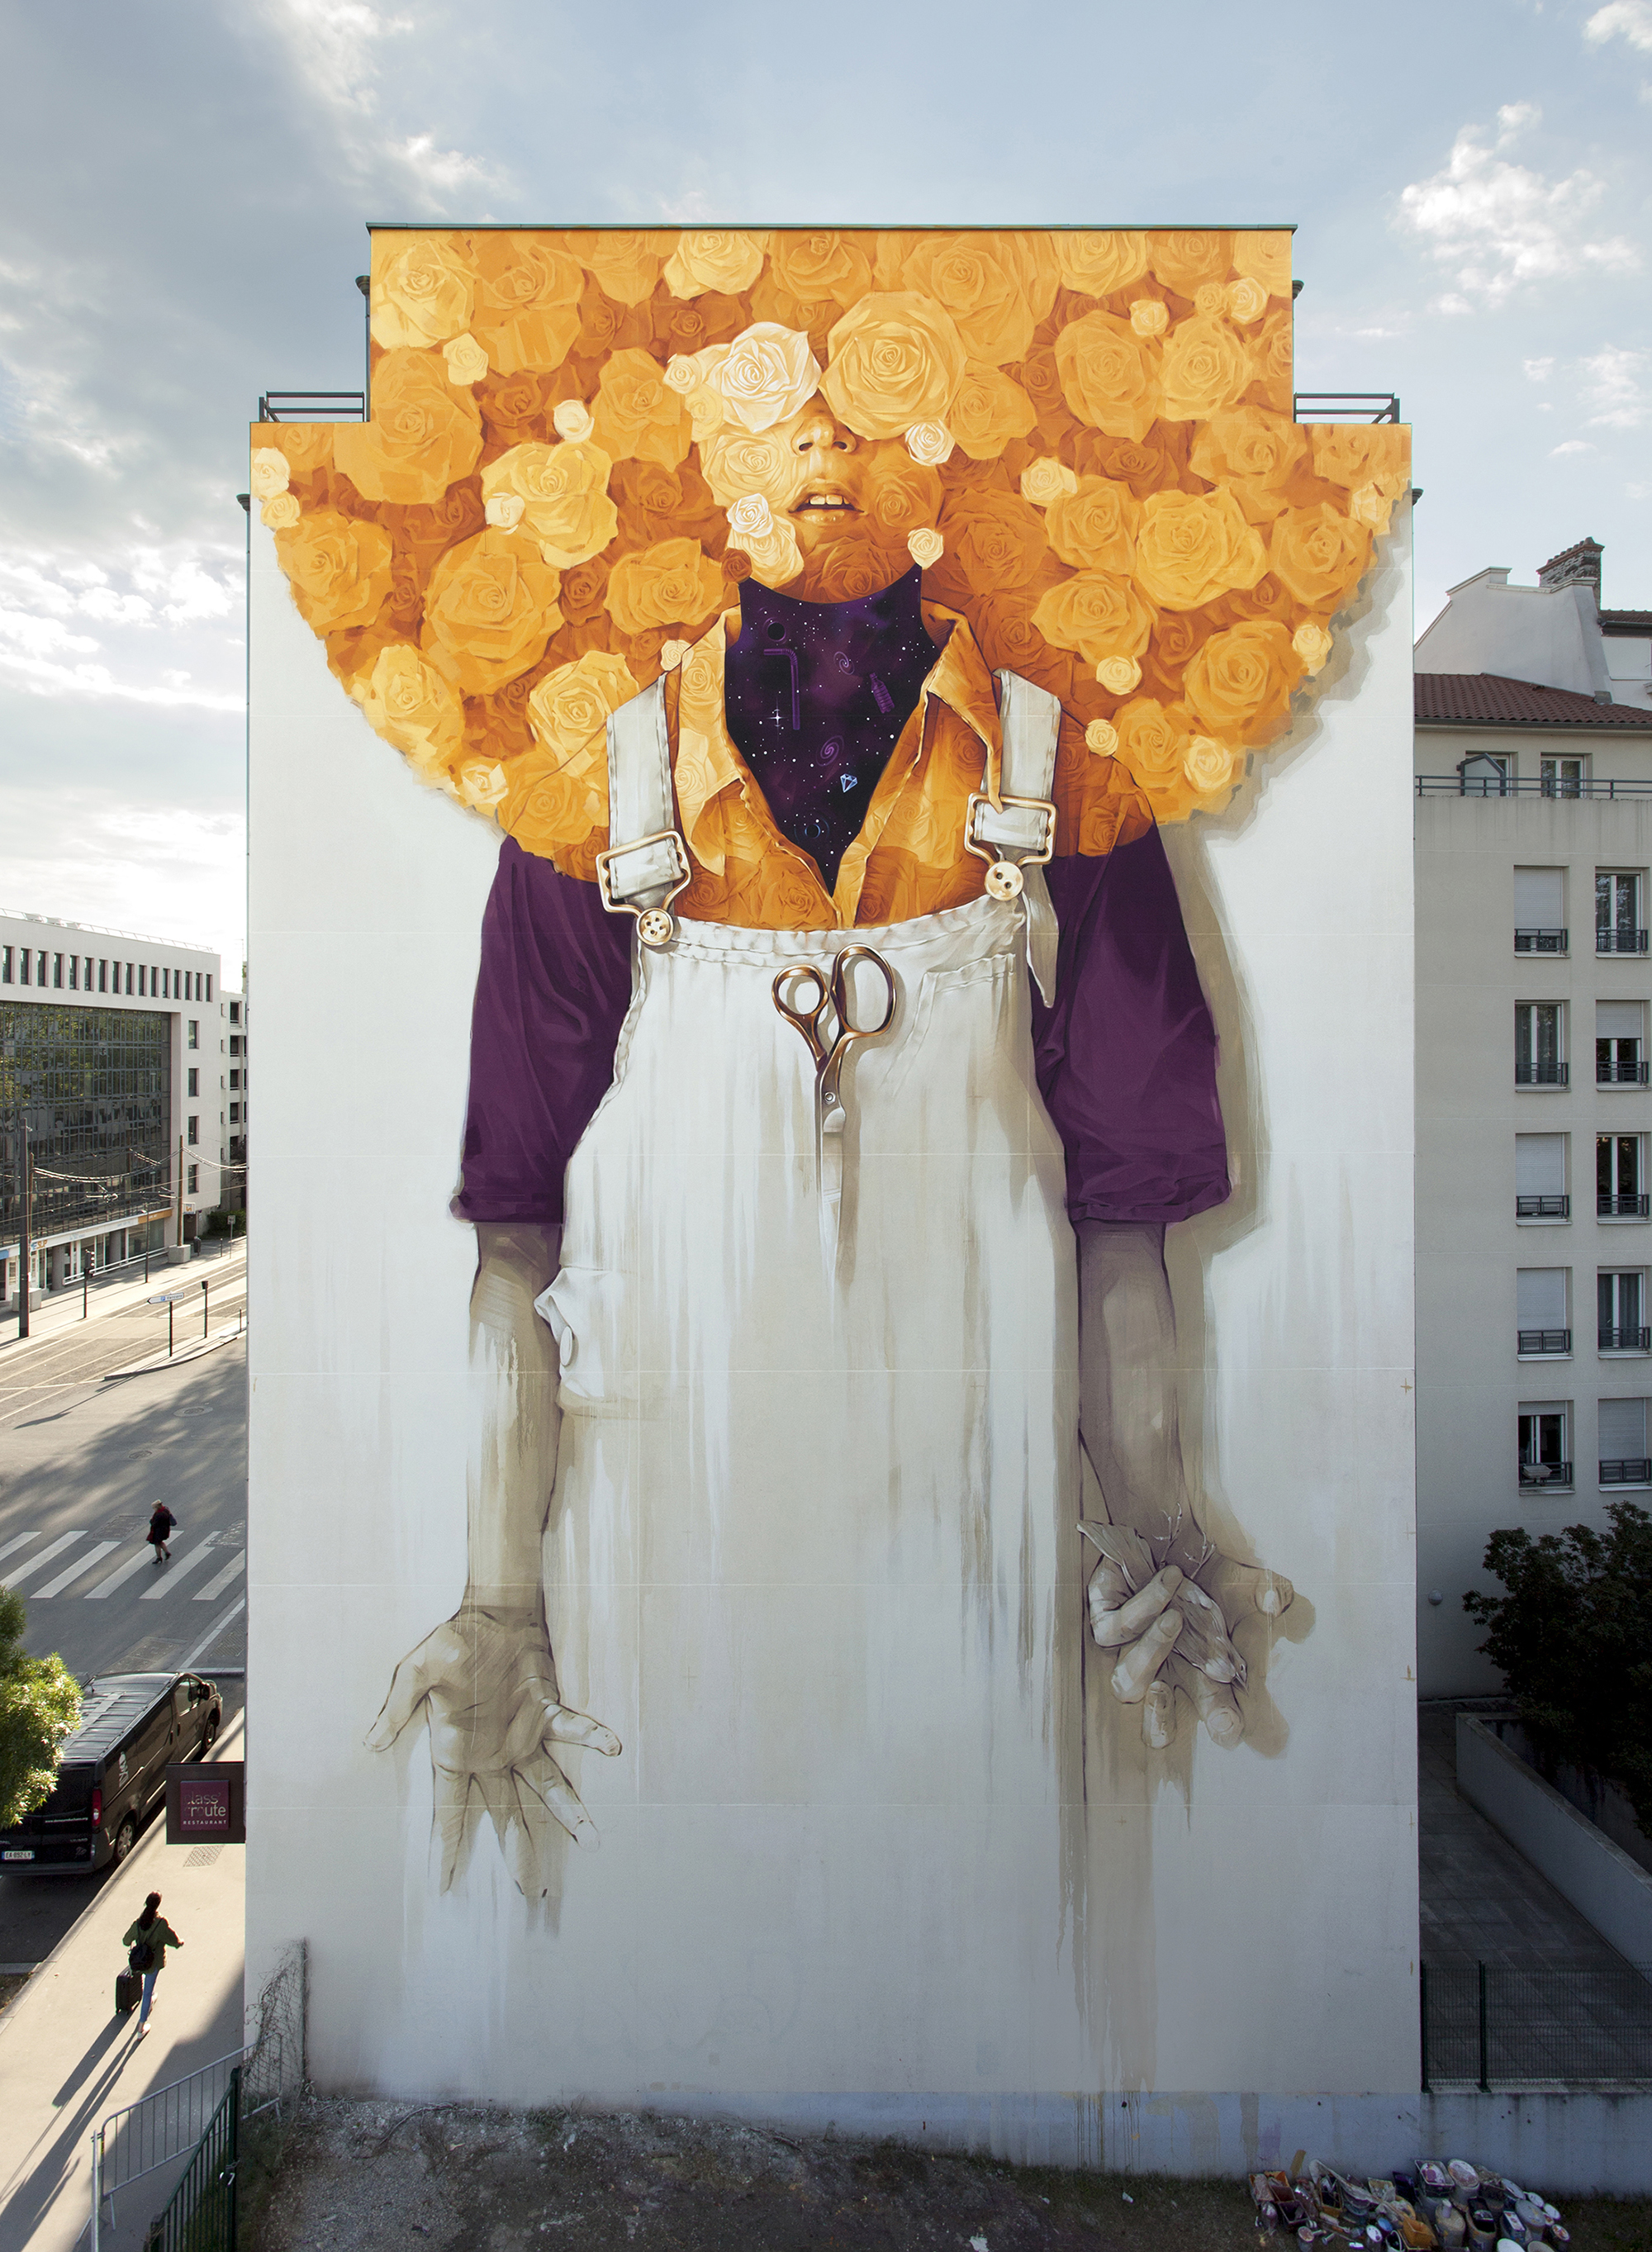 Radiant Flowers Overlook Lyon, France in New Mural by INTI